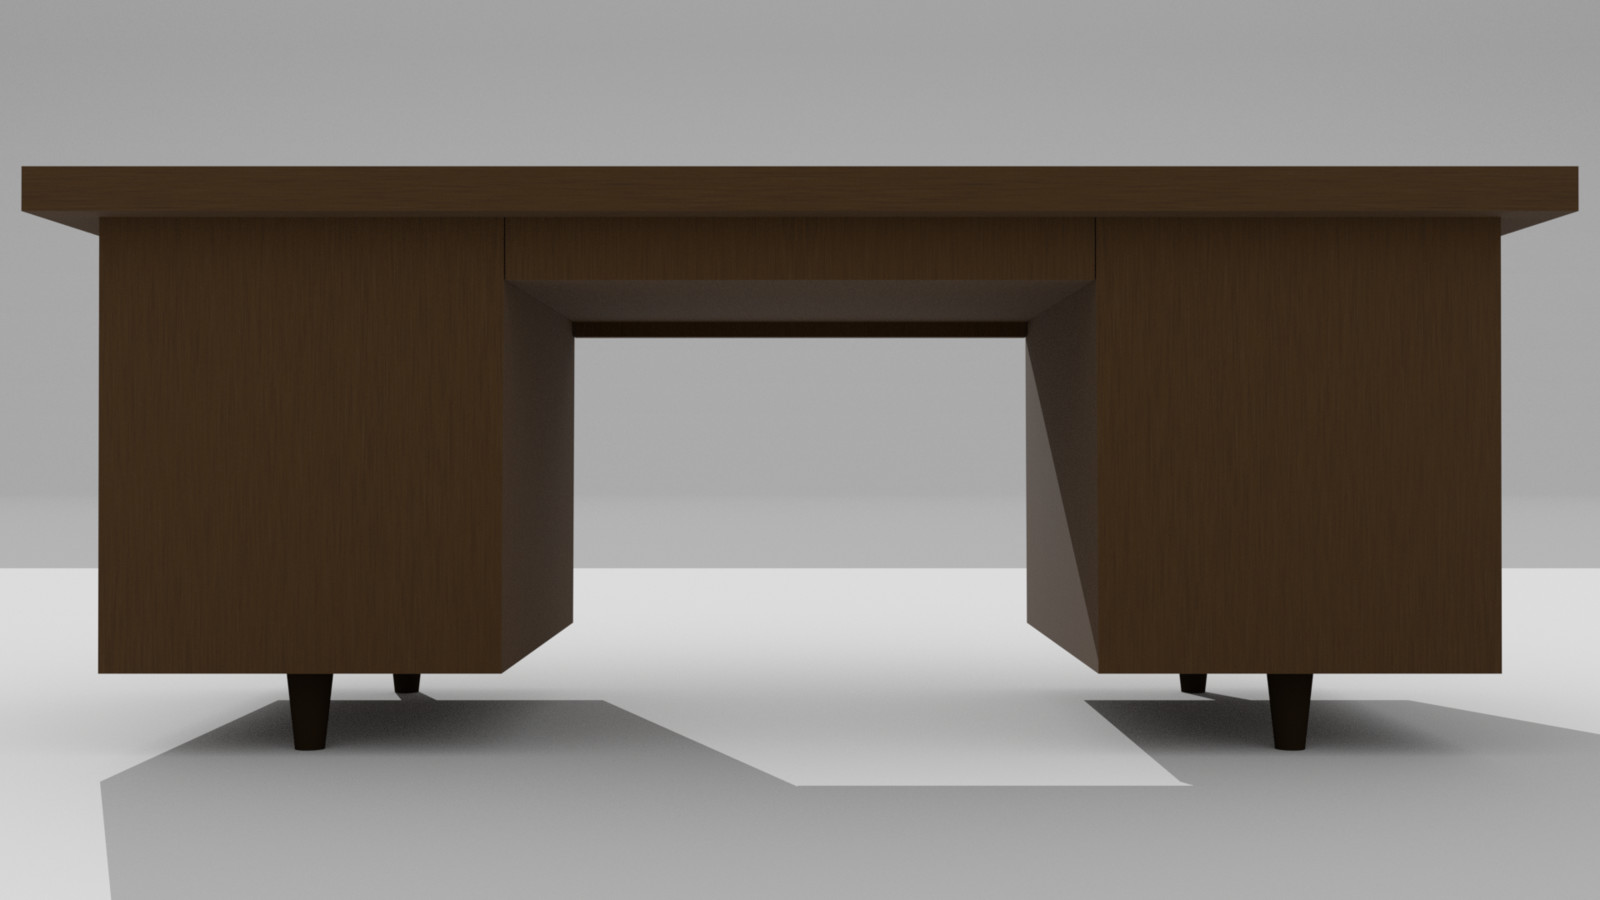 Backside view of the desk.